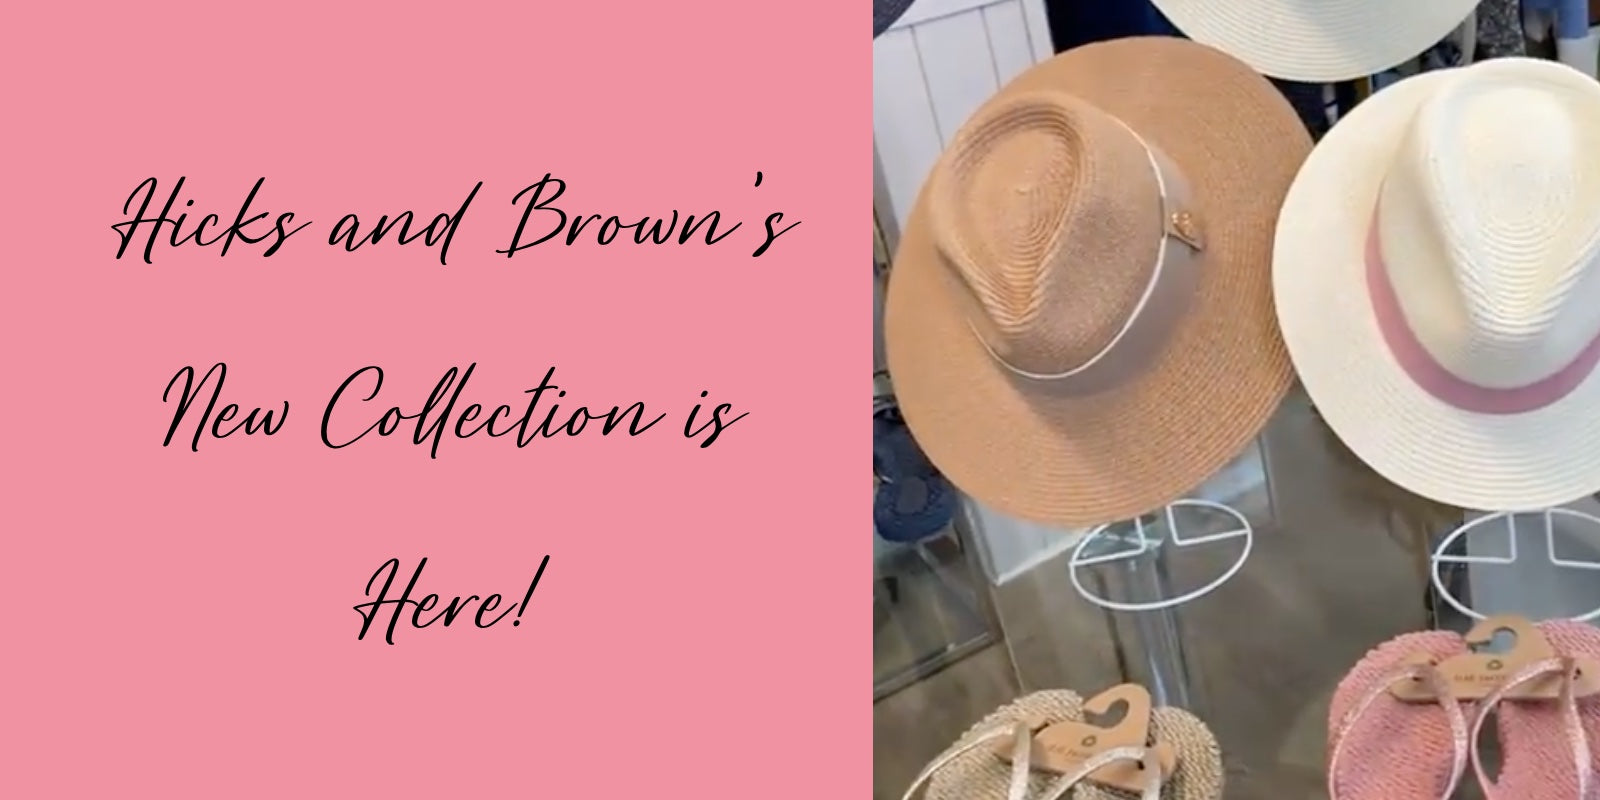 New Hicks and Brown Hats Arrived!